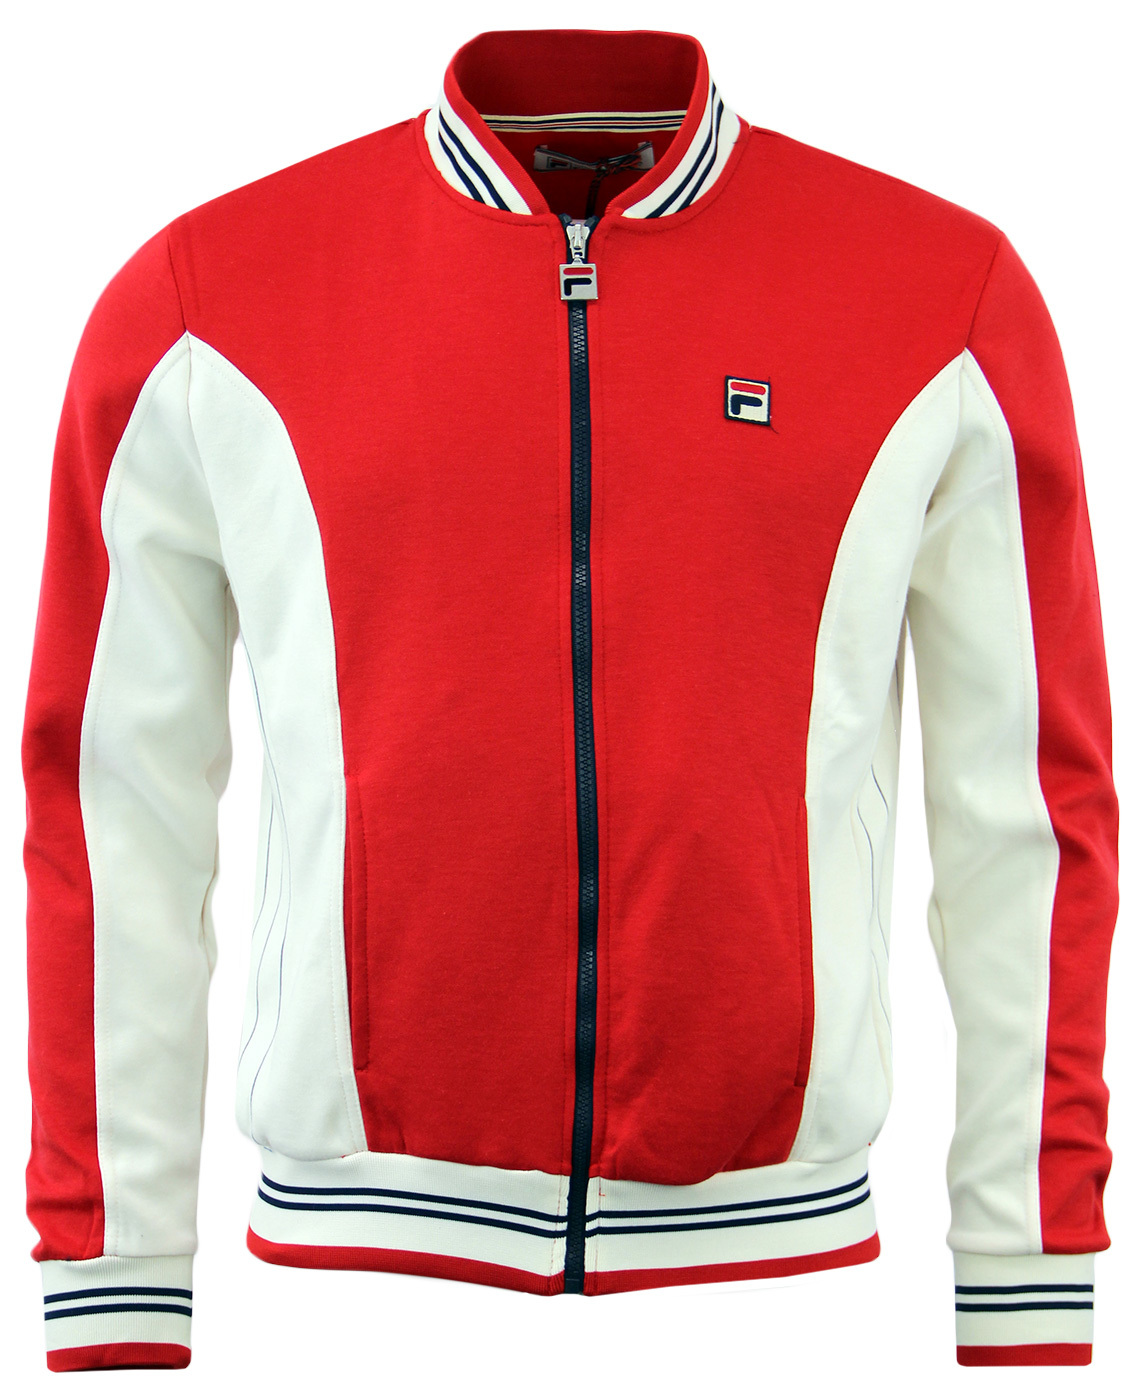 FILA VINTAGE Settanta Retro 1970s Mens Track Top in Chinese Red